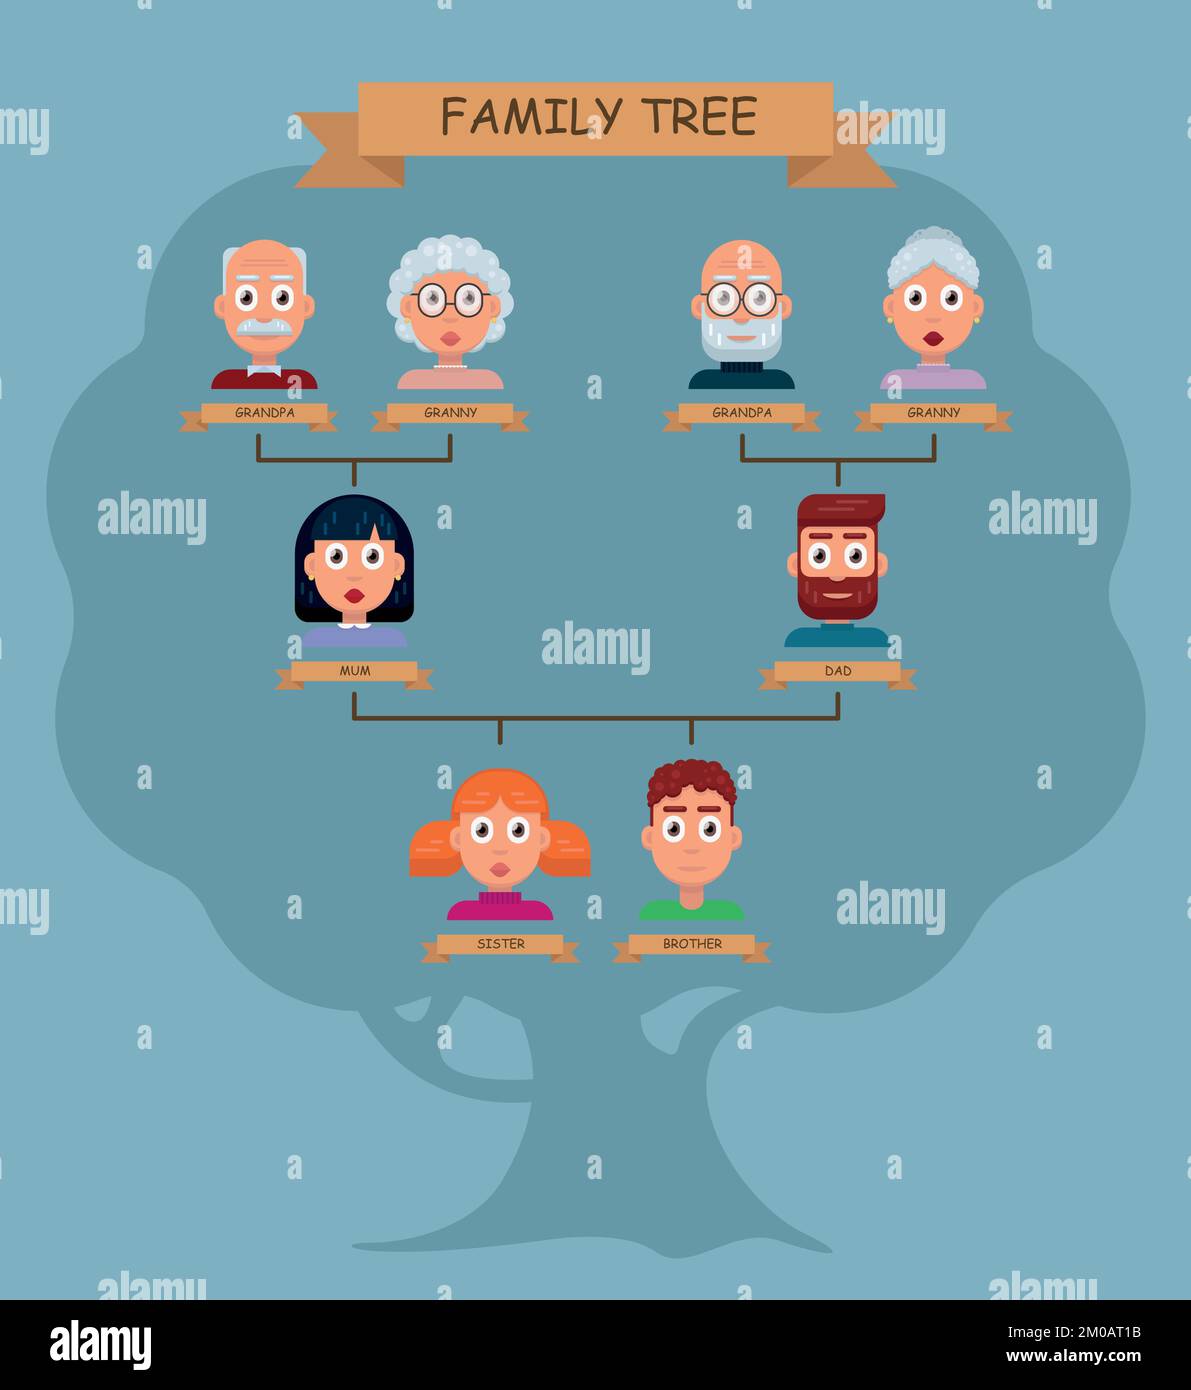 Family tree. Set of flat design character. Avatars of men and women of different ages: grandma, grandpa, mom, dad, sister, brother. Stock Vector